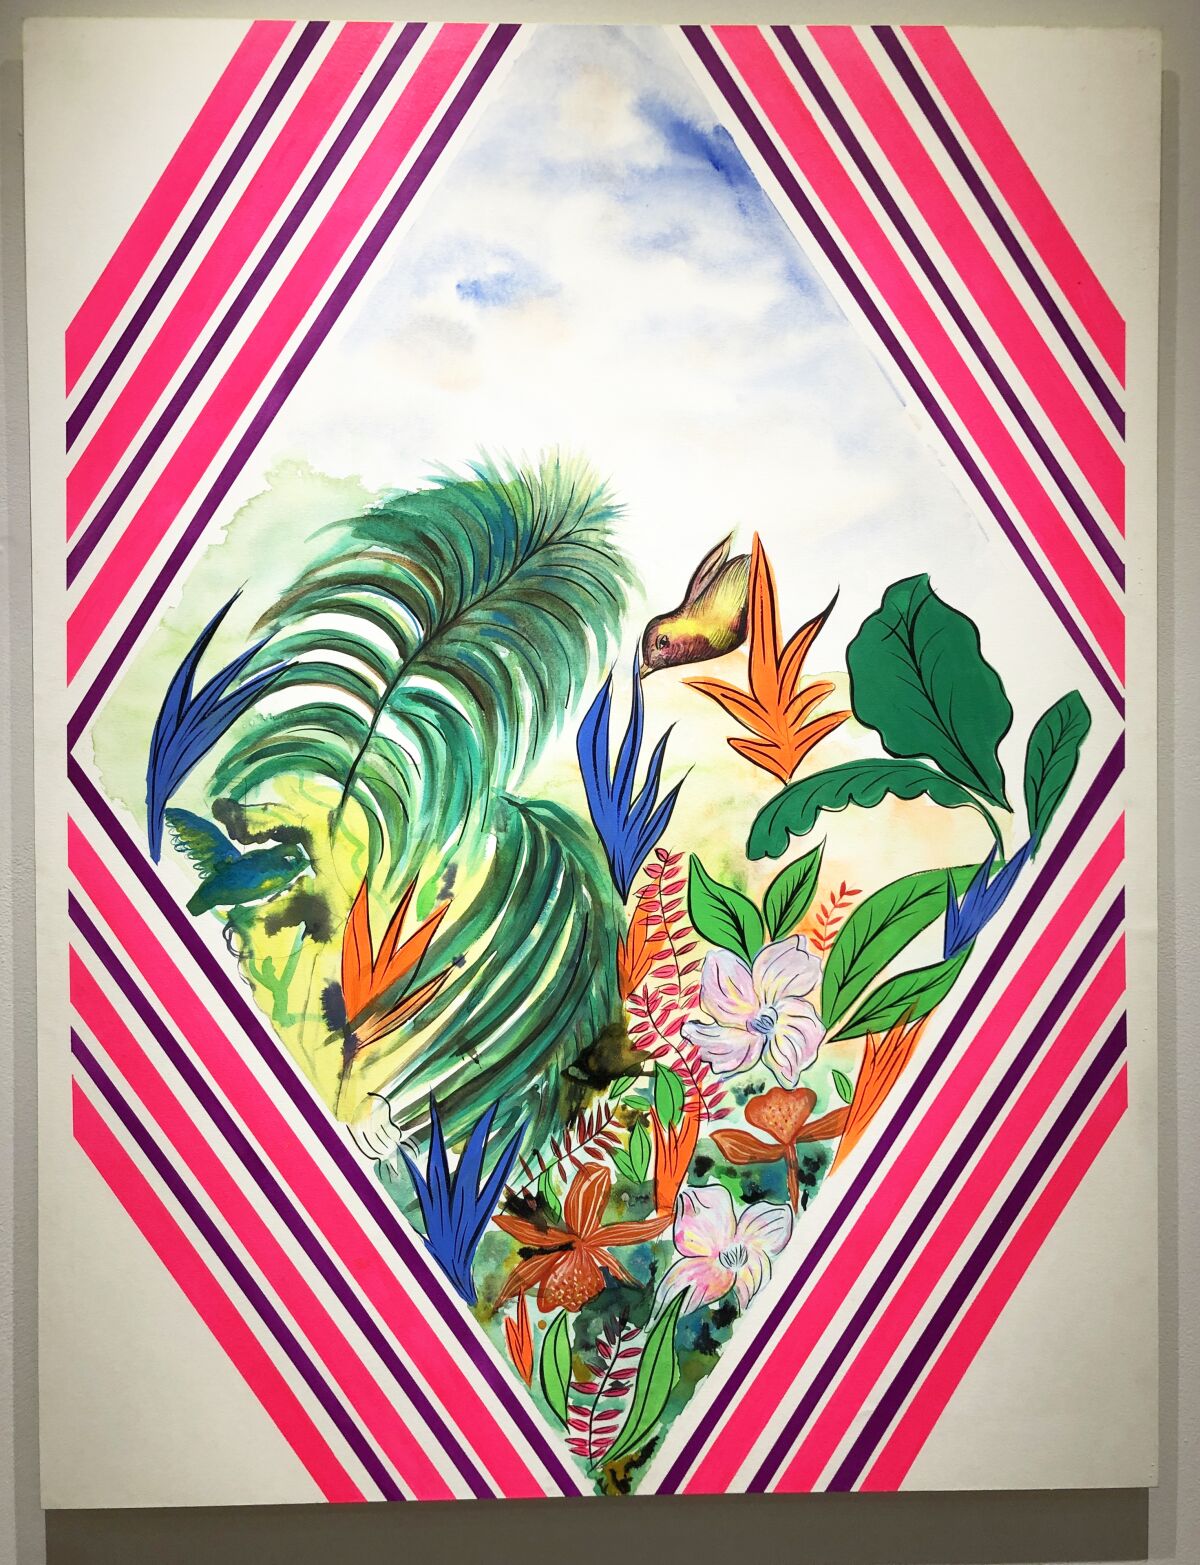 A painting by Carolyn Castaño features a tropical scene surrounded by bright bands of color